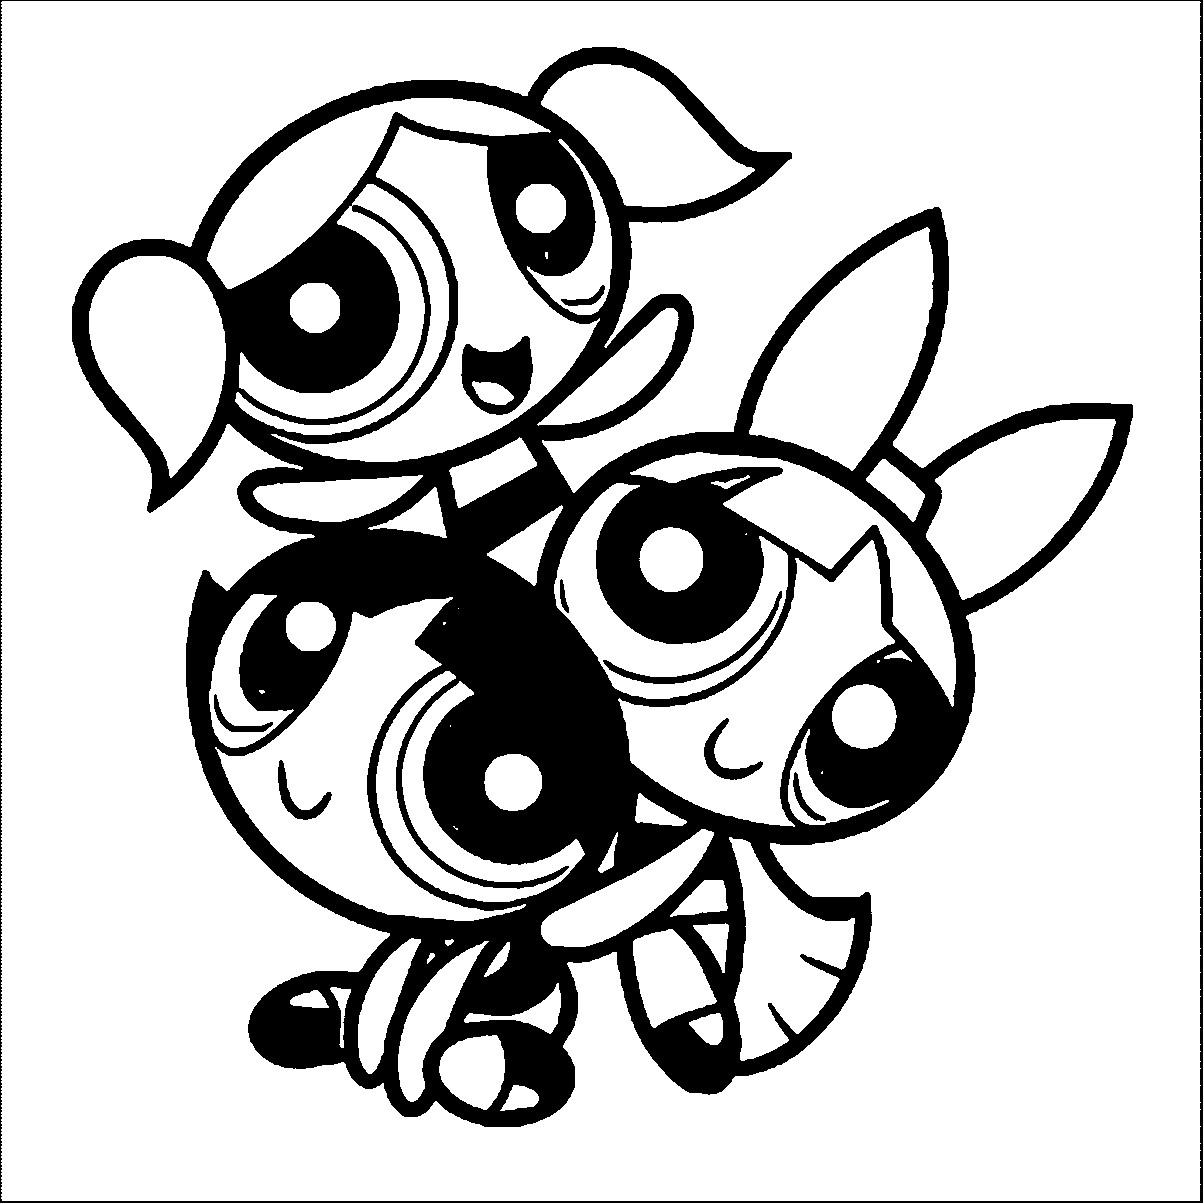 Powder Puff Boys Coloring Pages
 Powerpuff Girls Coloring Pages